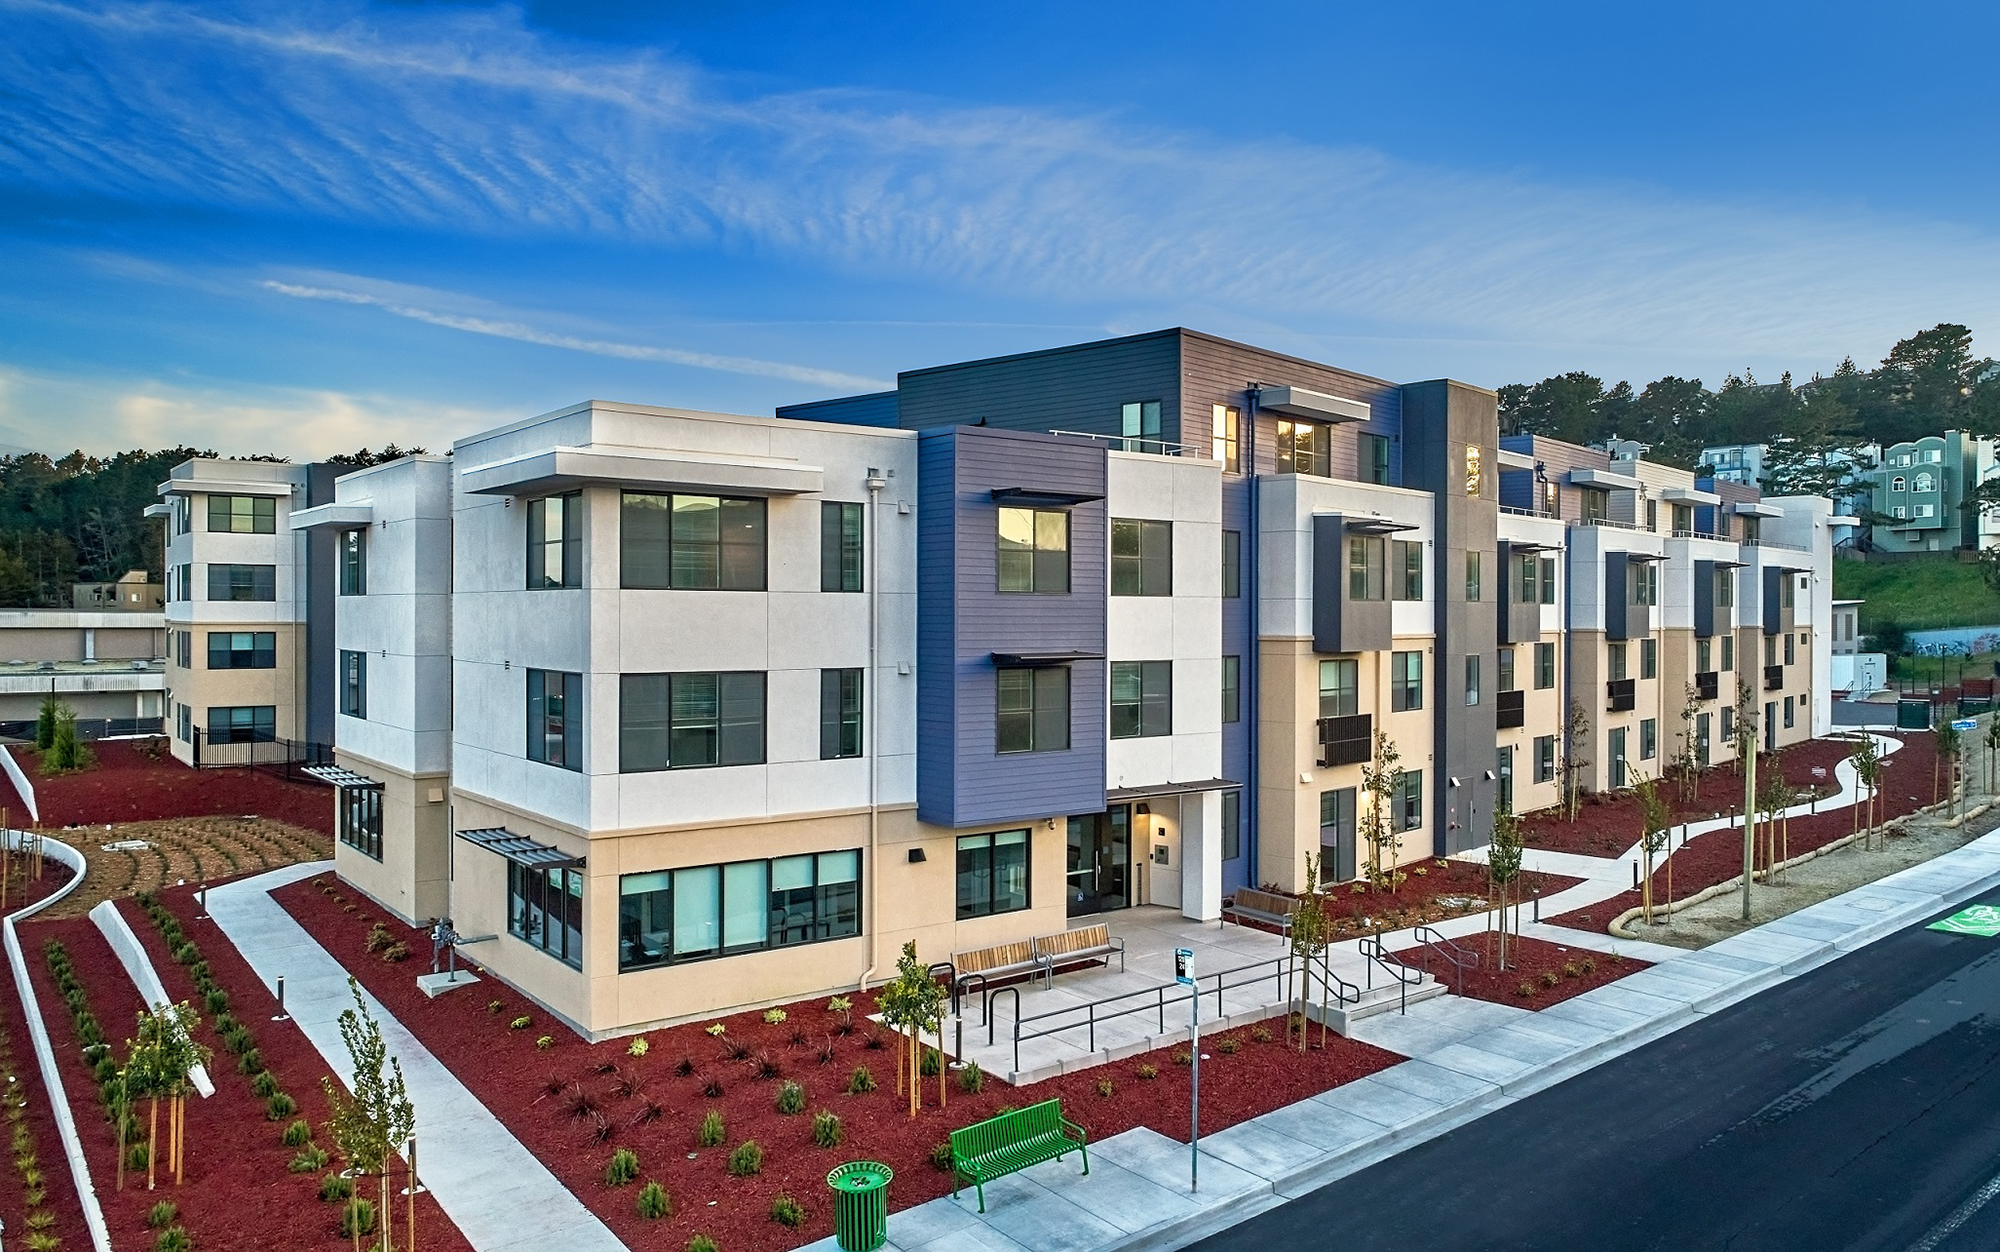 JUHSD Faculty and Staff Housing at 705 Serramonte, designed by SVA Architects